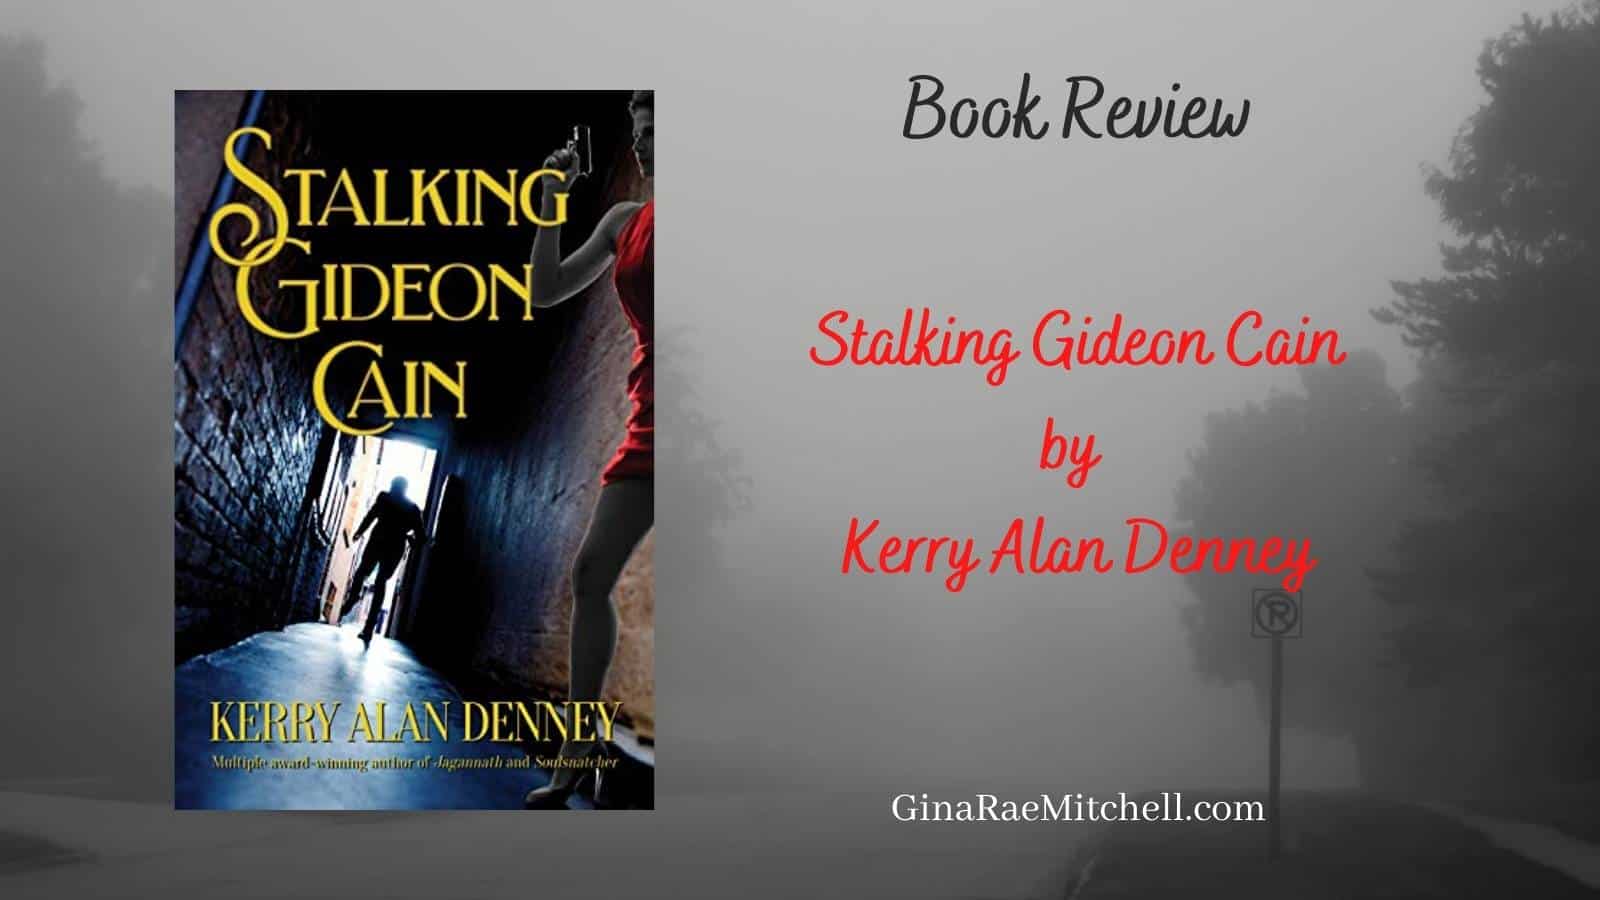 Stalking Gideon Cain by Kerry Alan Denney | Review